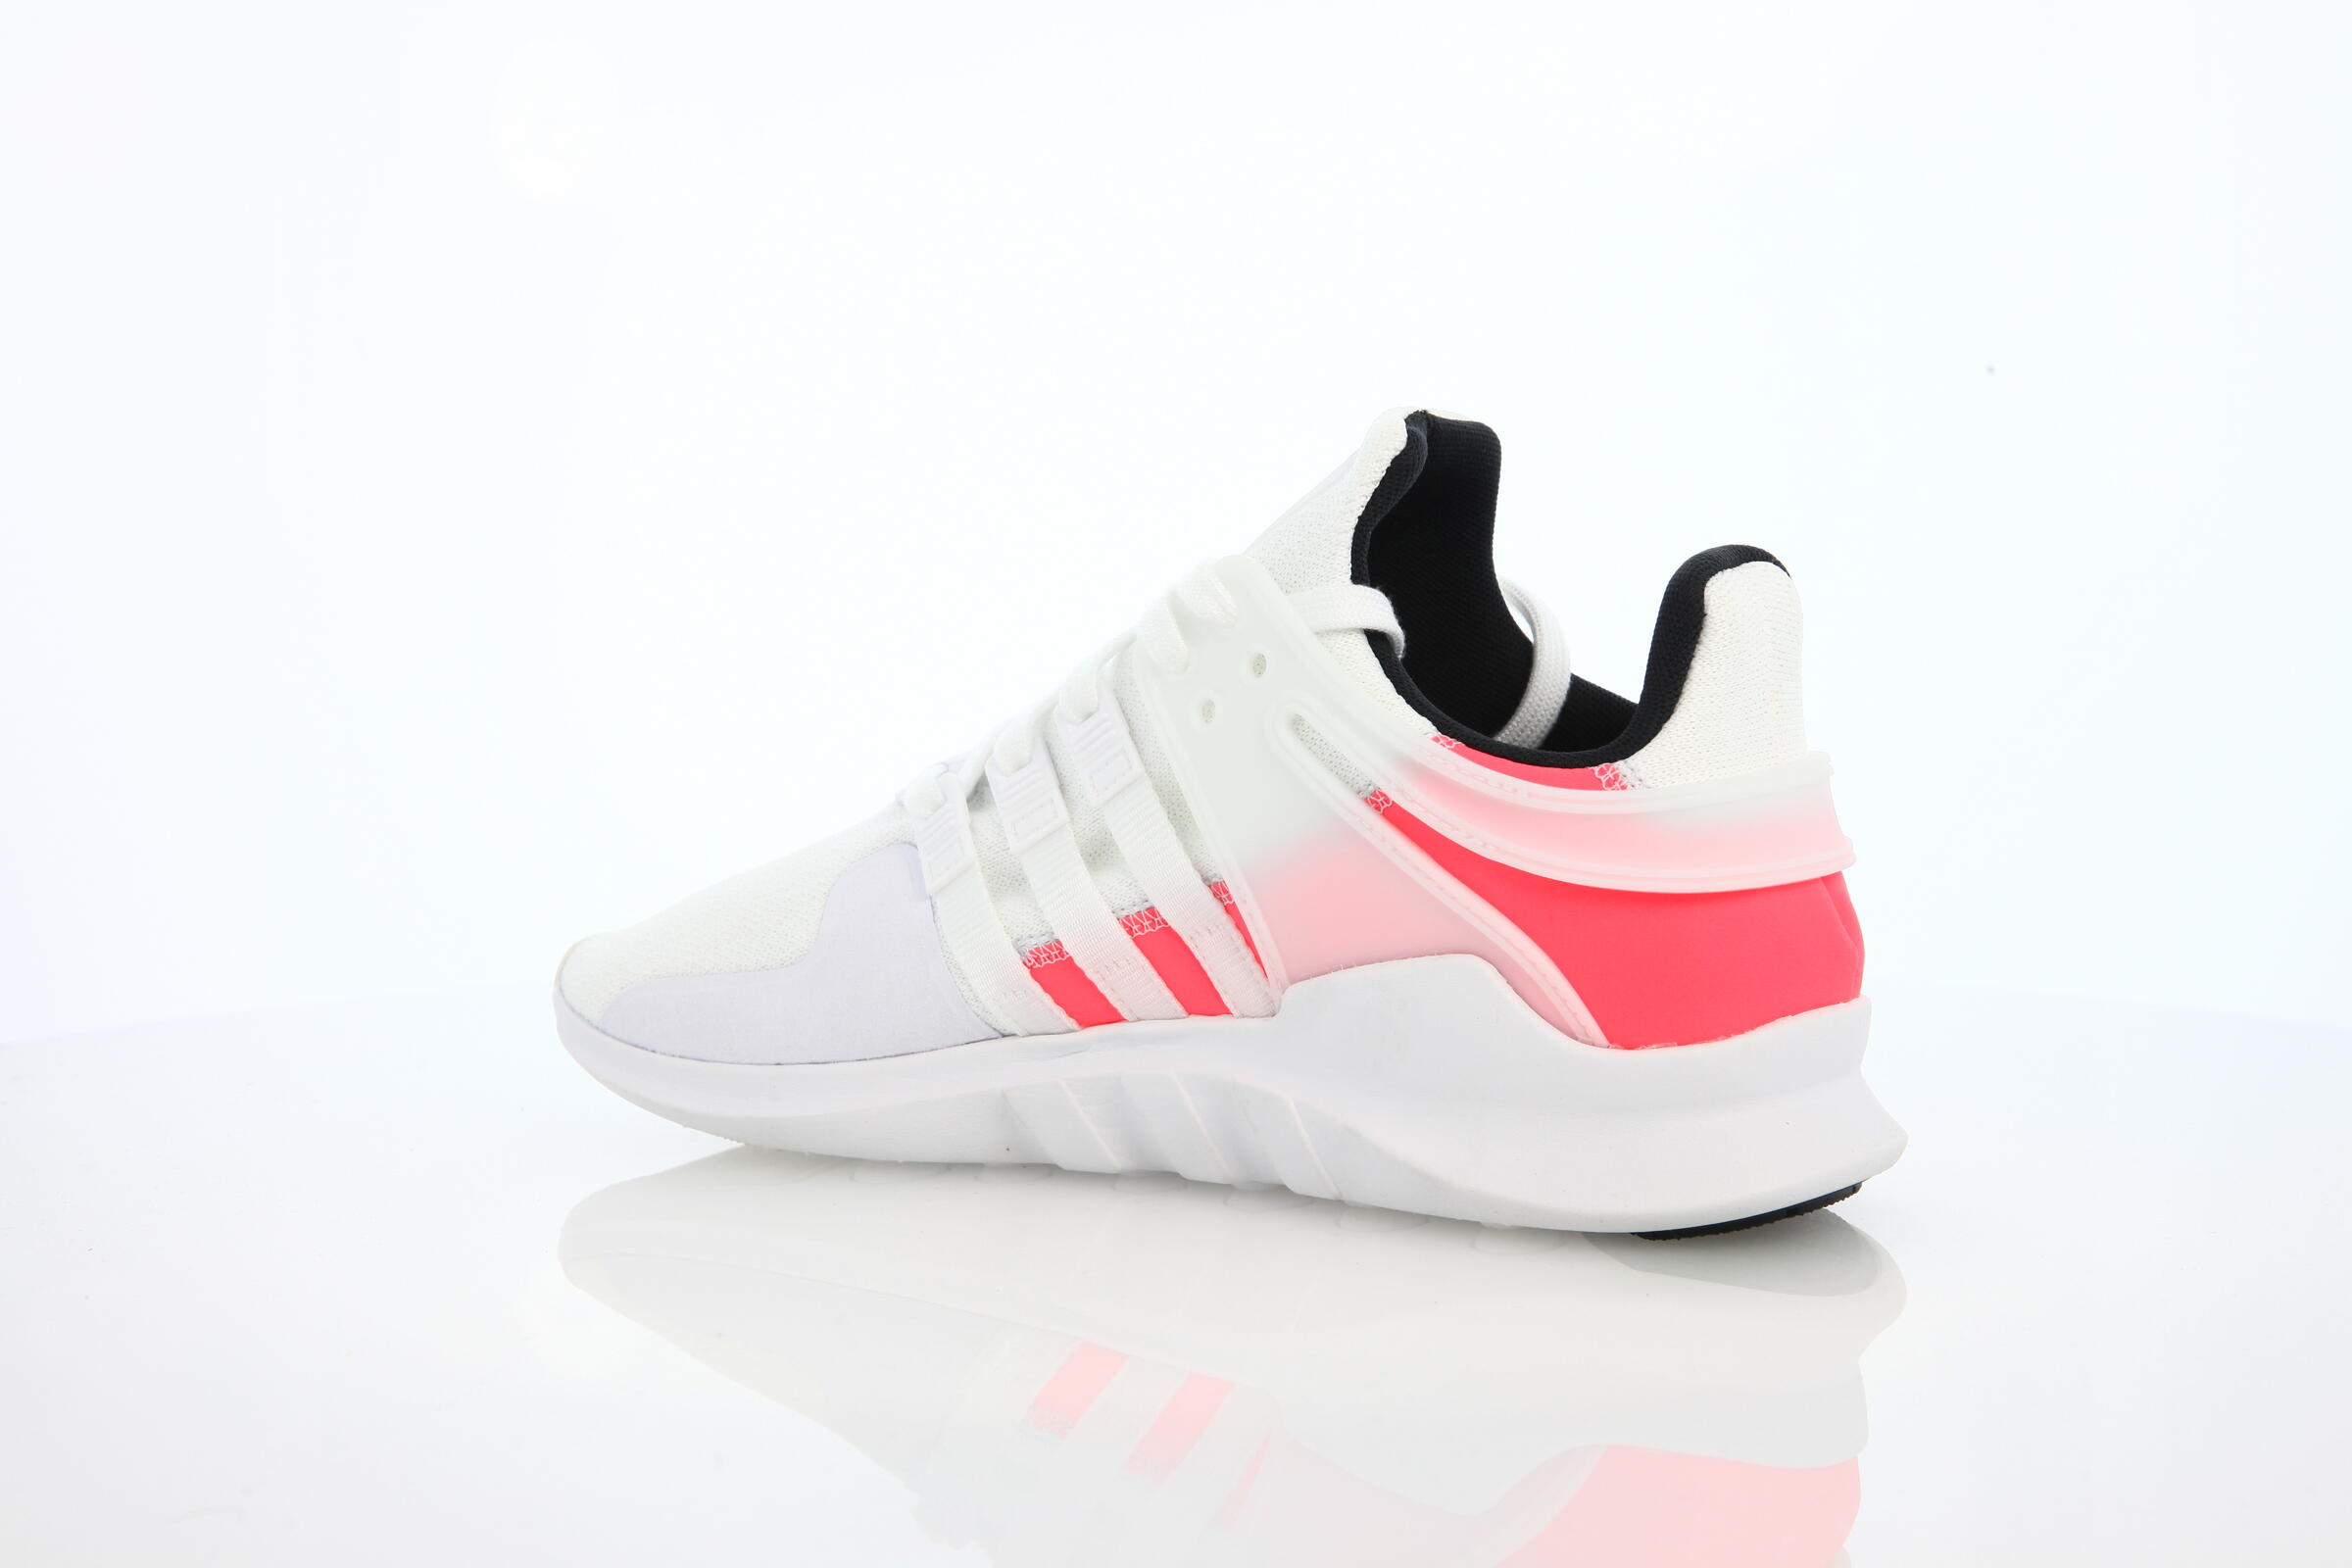 adidas Performance Equipment Support Adv "Crystal White"